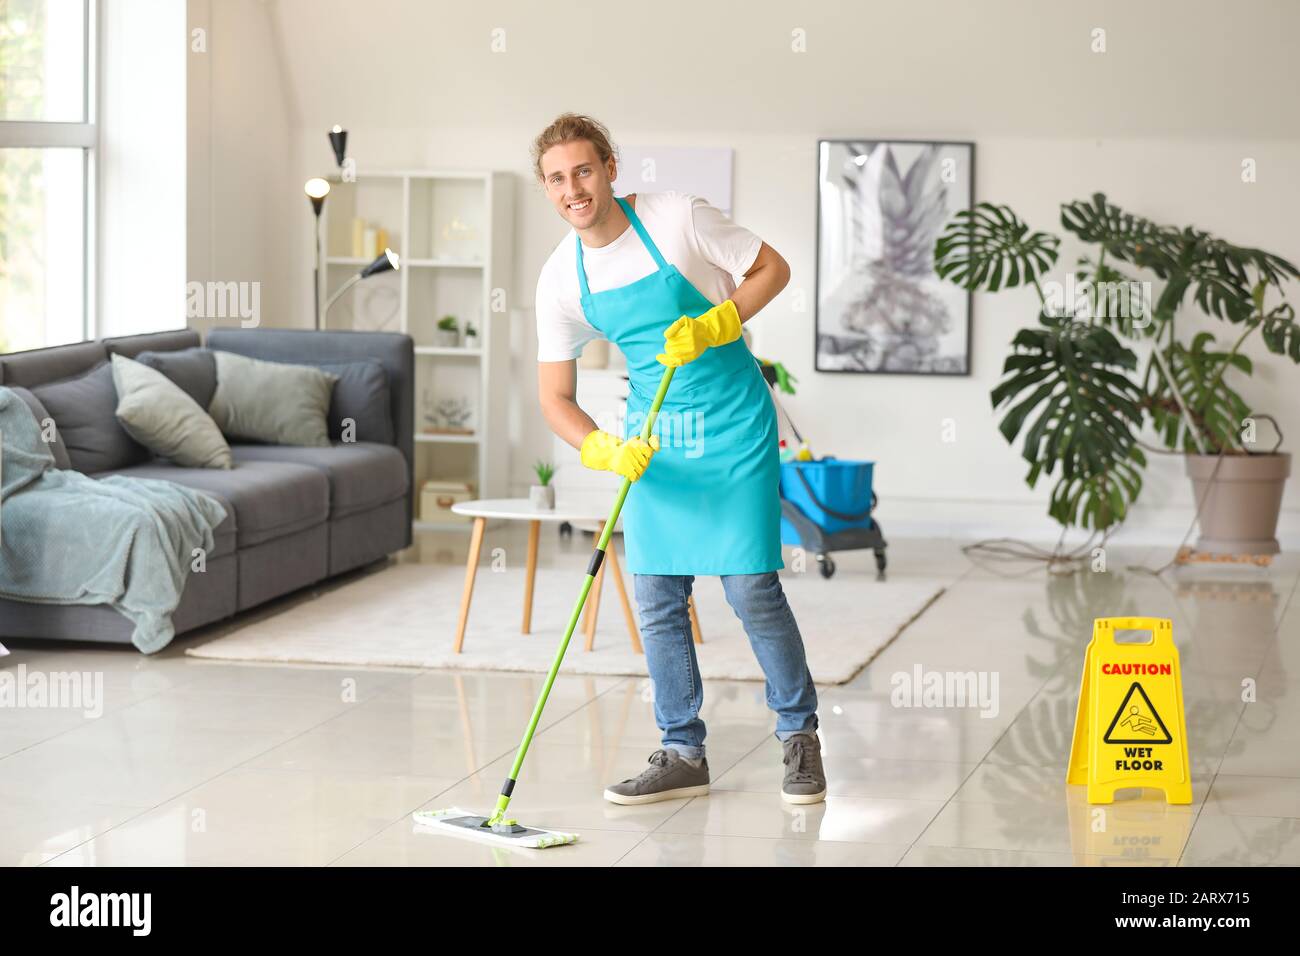 Male janitor mopping floor in flat Stock Photo